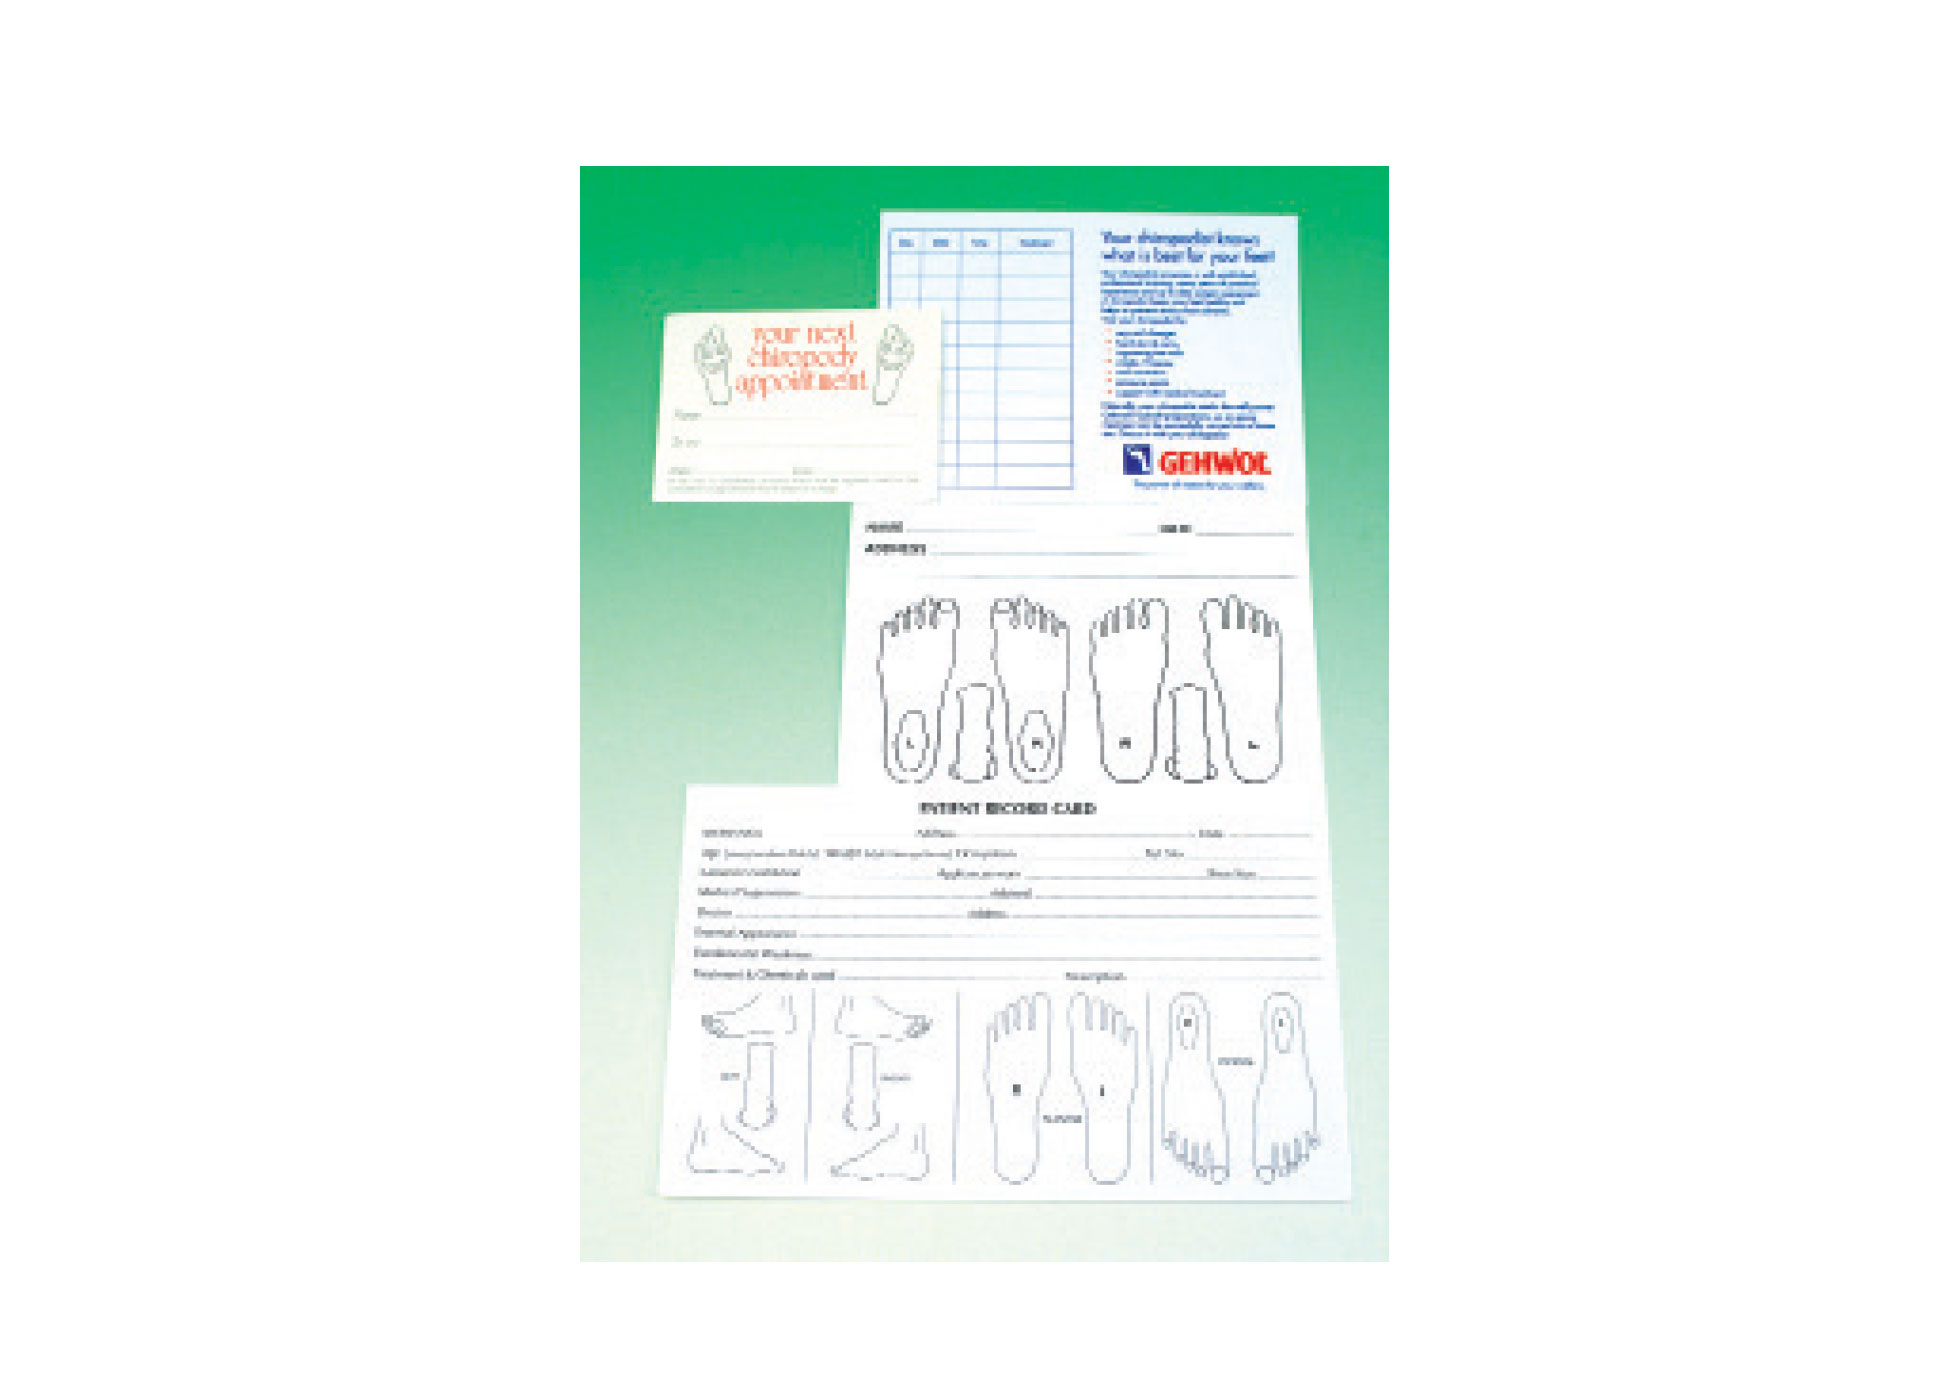 Appointment Cards - Pack of 100 - 10 Appointments per Card